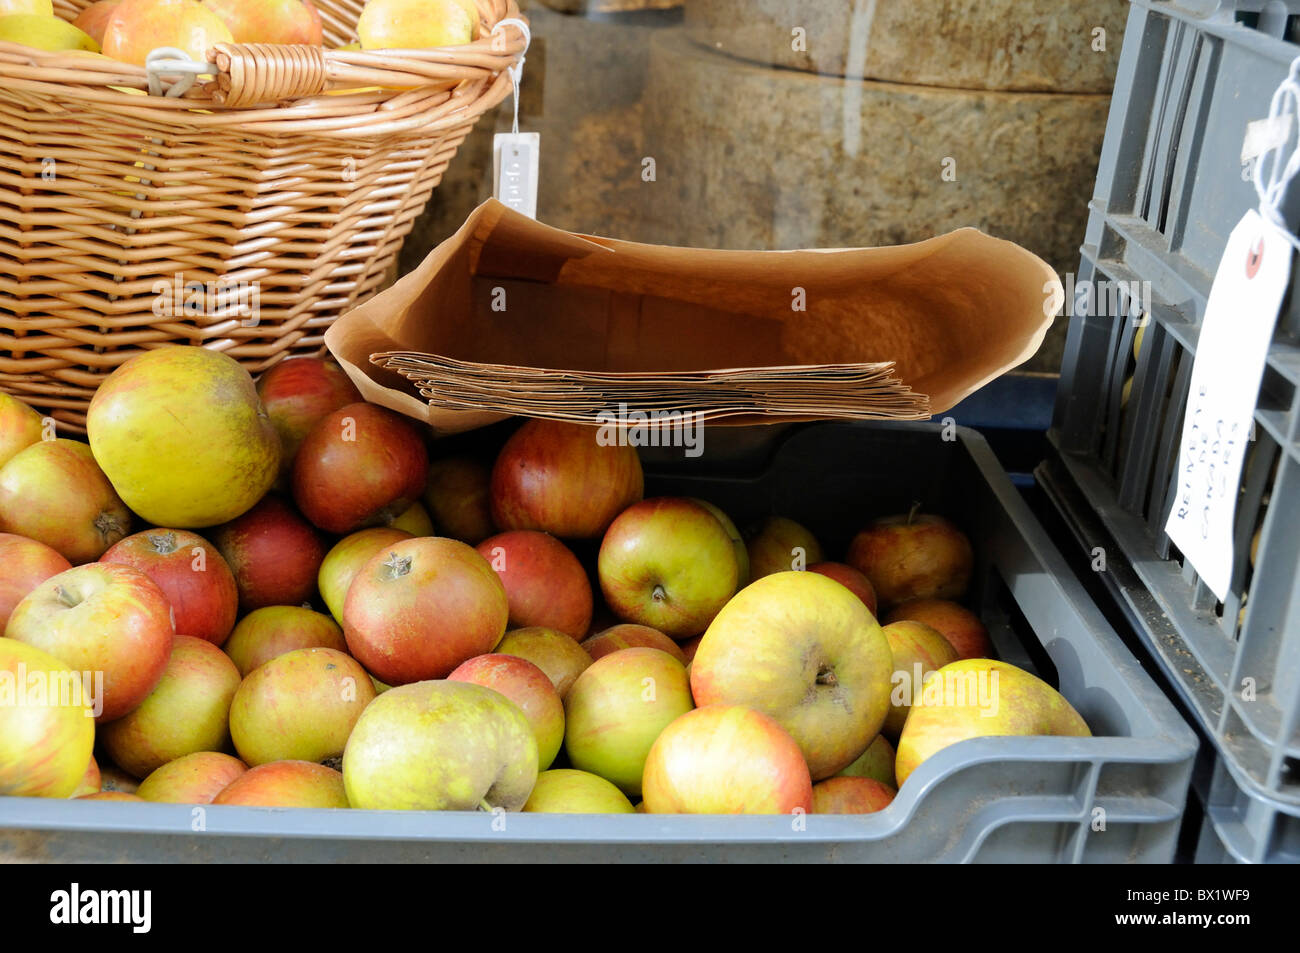 Cox apples for sale outside shop with brown paper bags Stock Photo